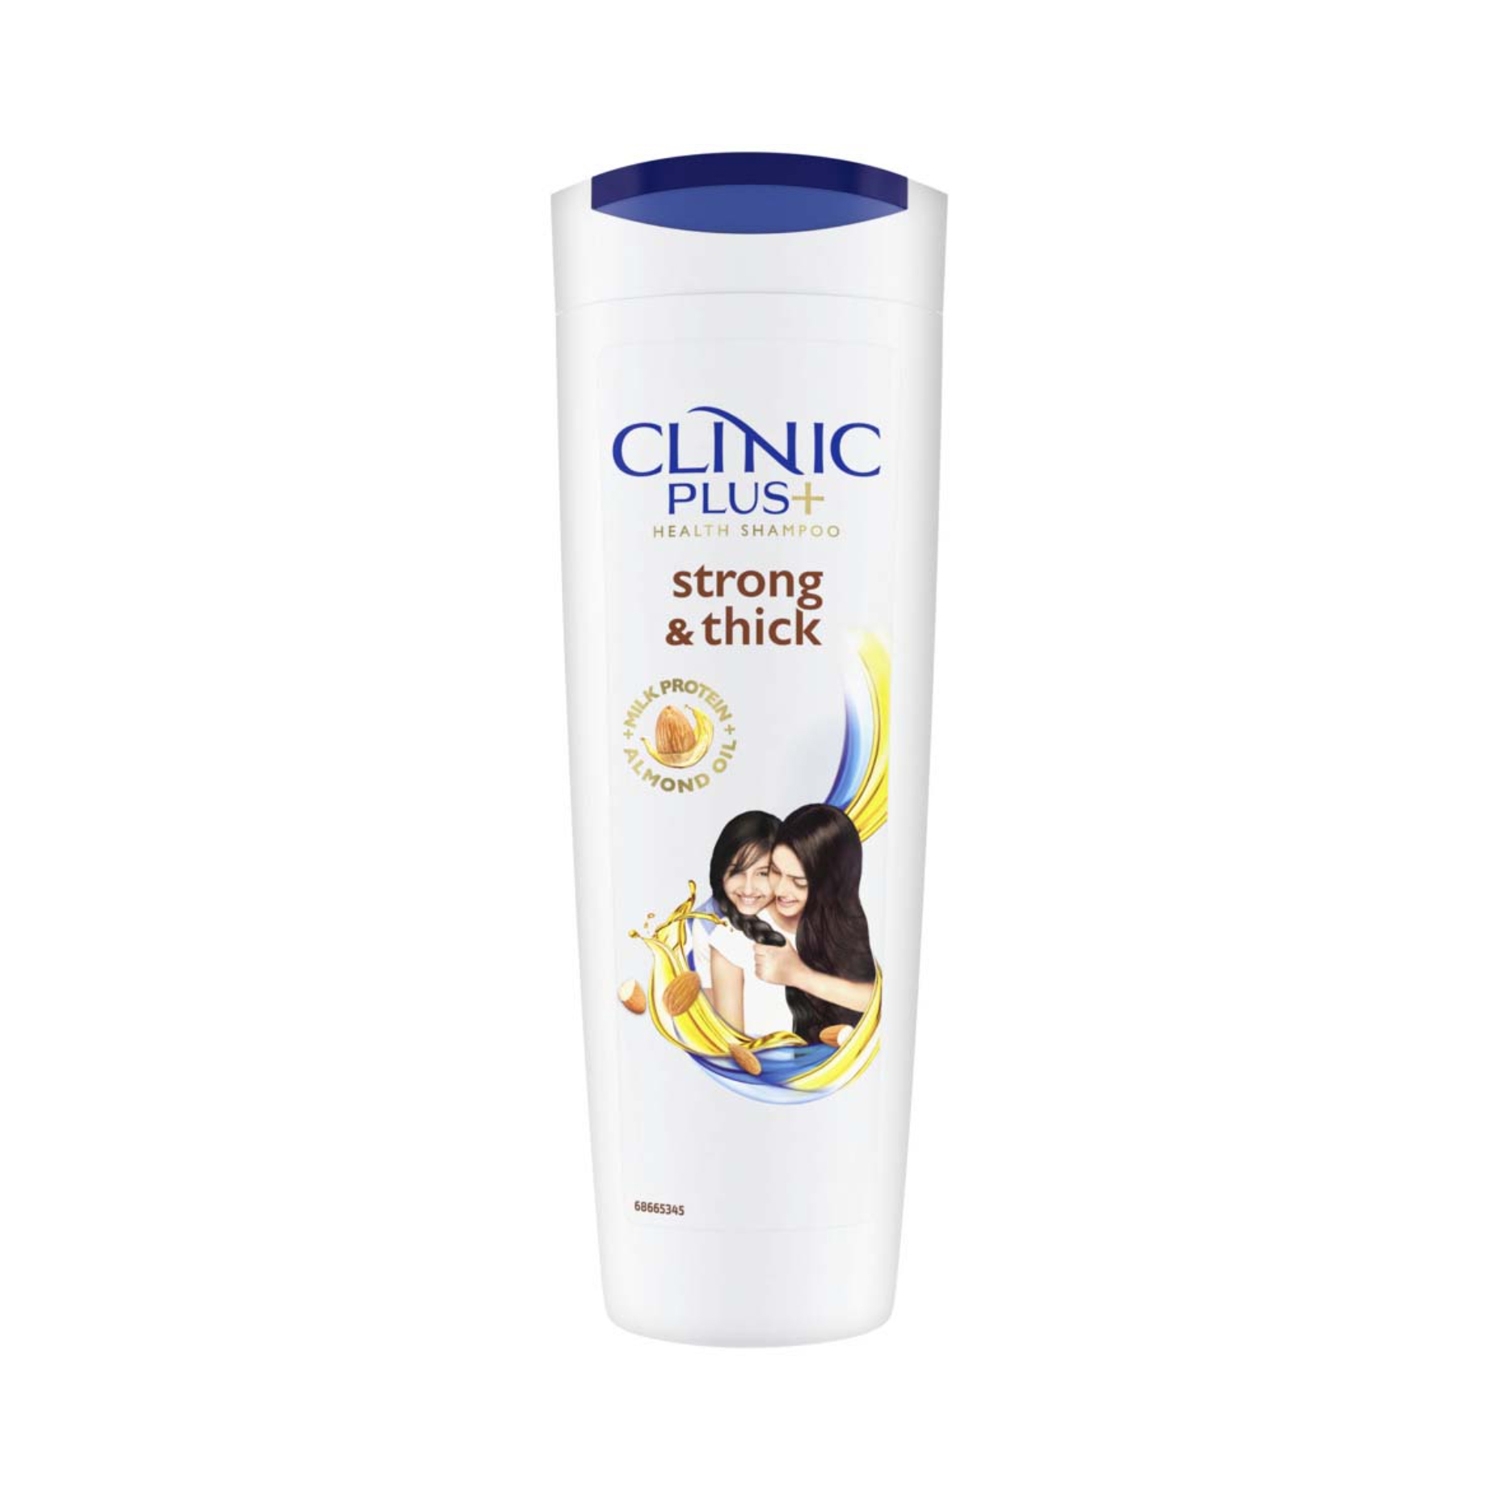 Clinic Plus | Clinic Plus Strong & Extra Thick Shampoo With Milk Protein & Almond Oil (355ml)